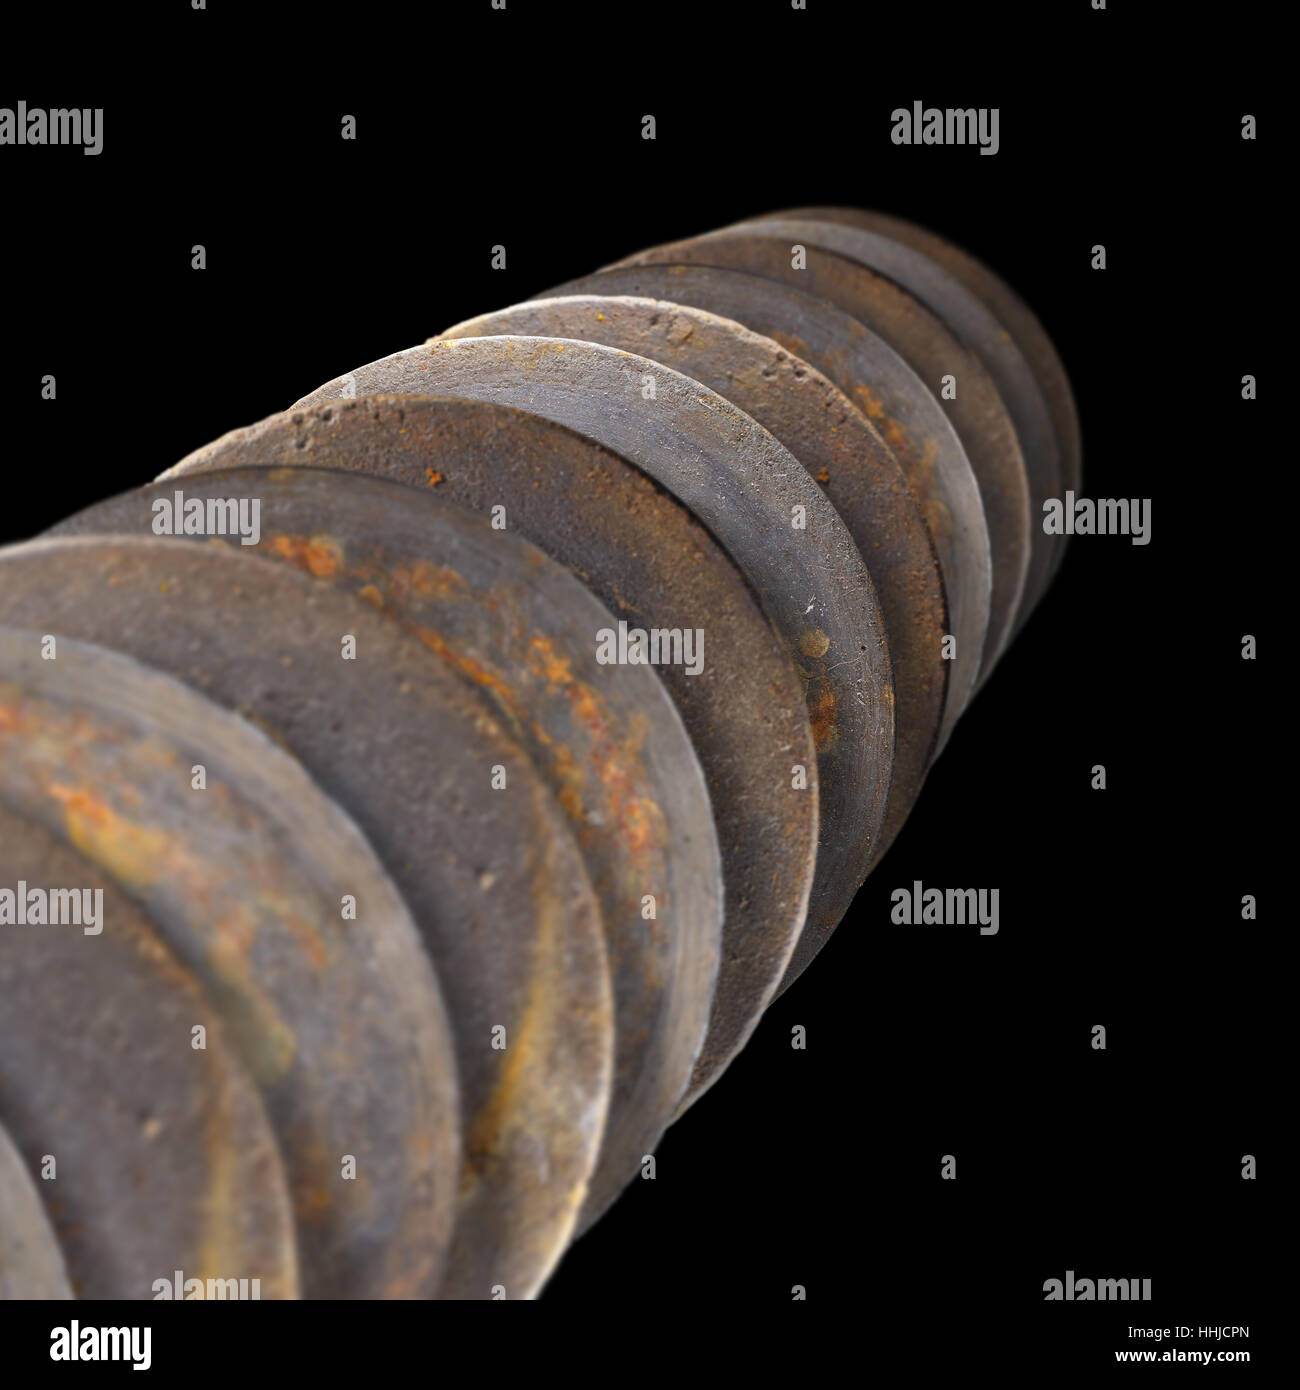 Array of old discarded sanding discs on a black background Stock Photo